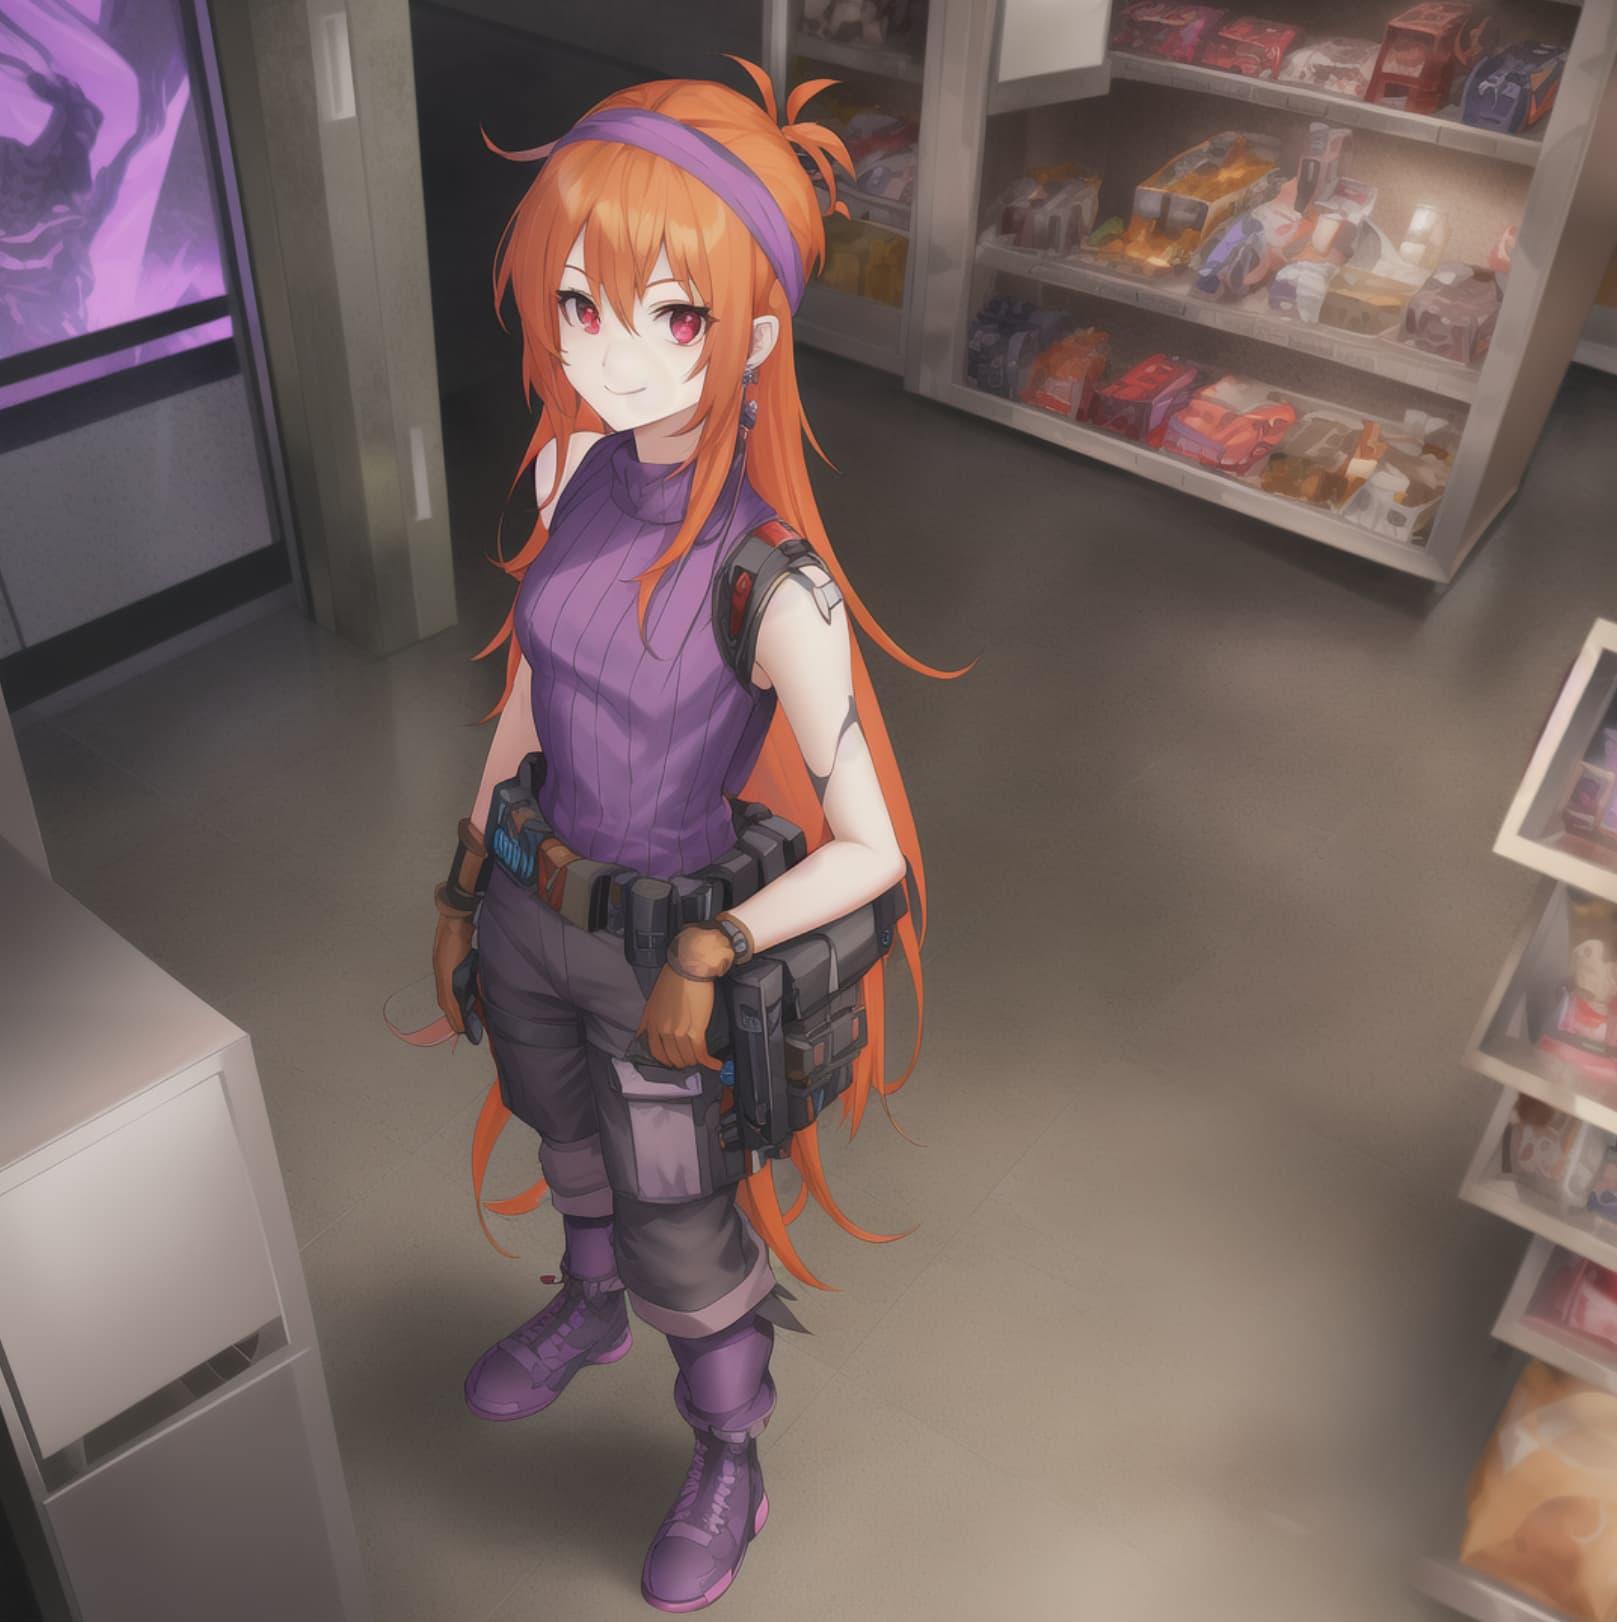 An orange-haired girl with a purple headband, wearing a purple turtleneck sleeveless top, khaki shorts, and purple boots, stands in a deserted convenience store